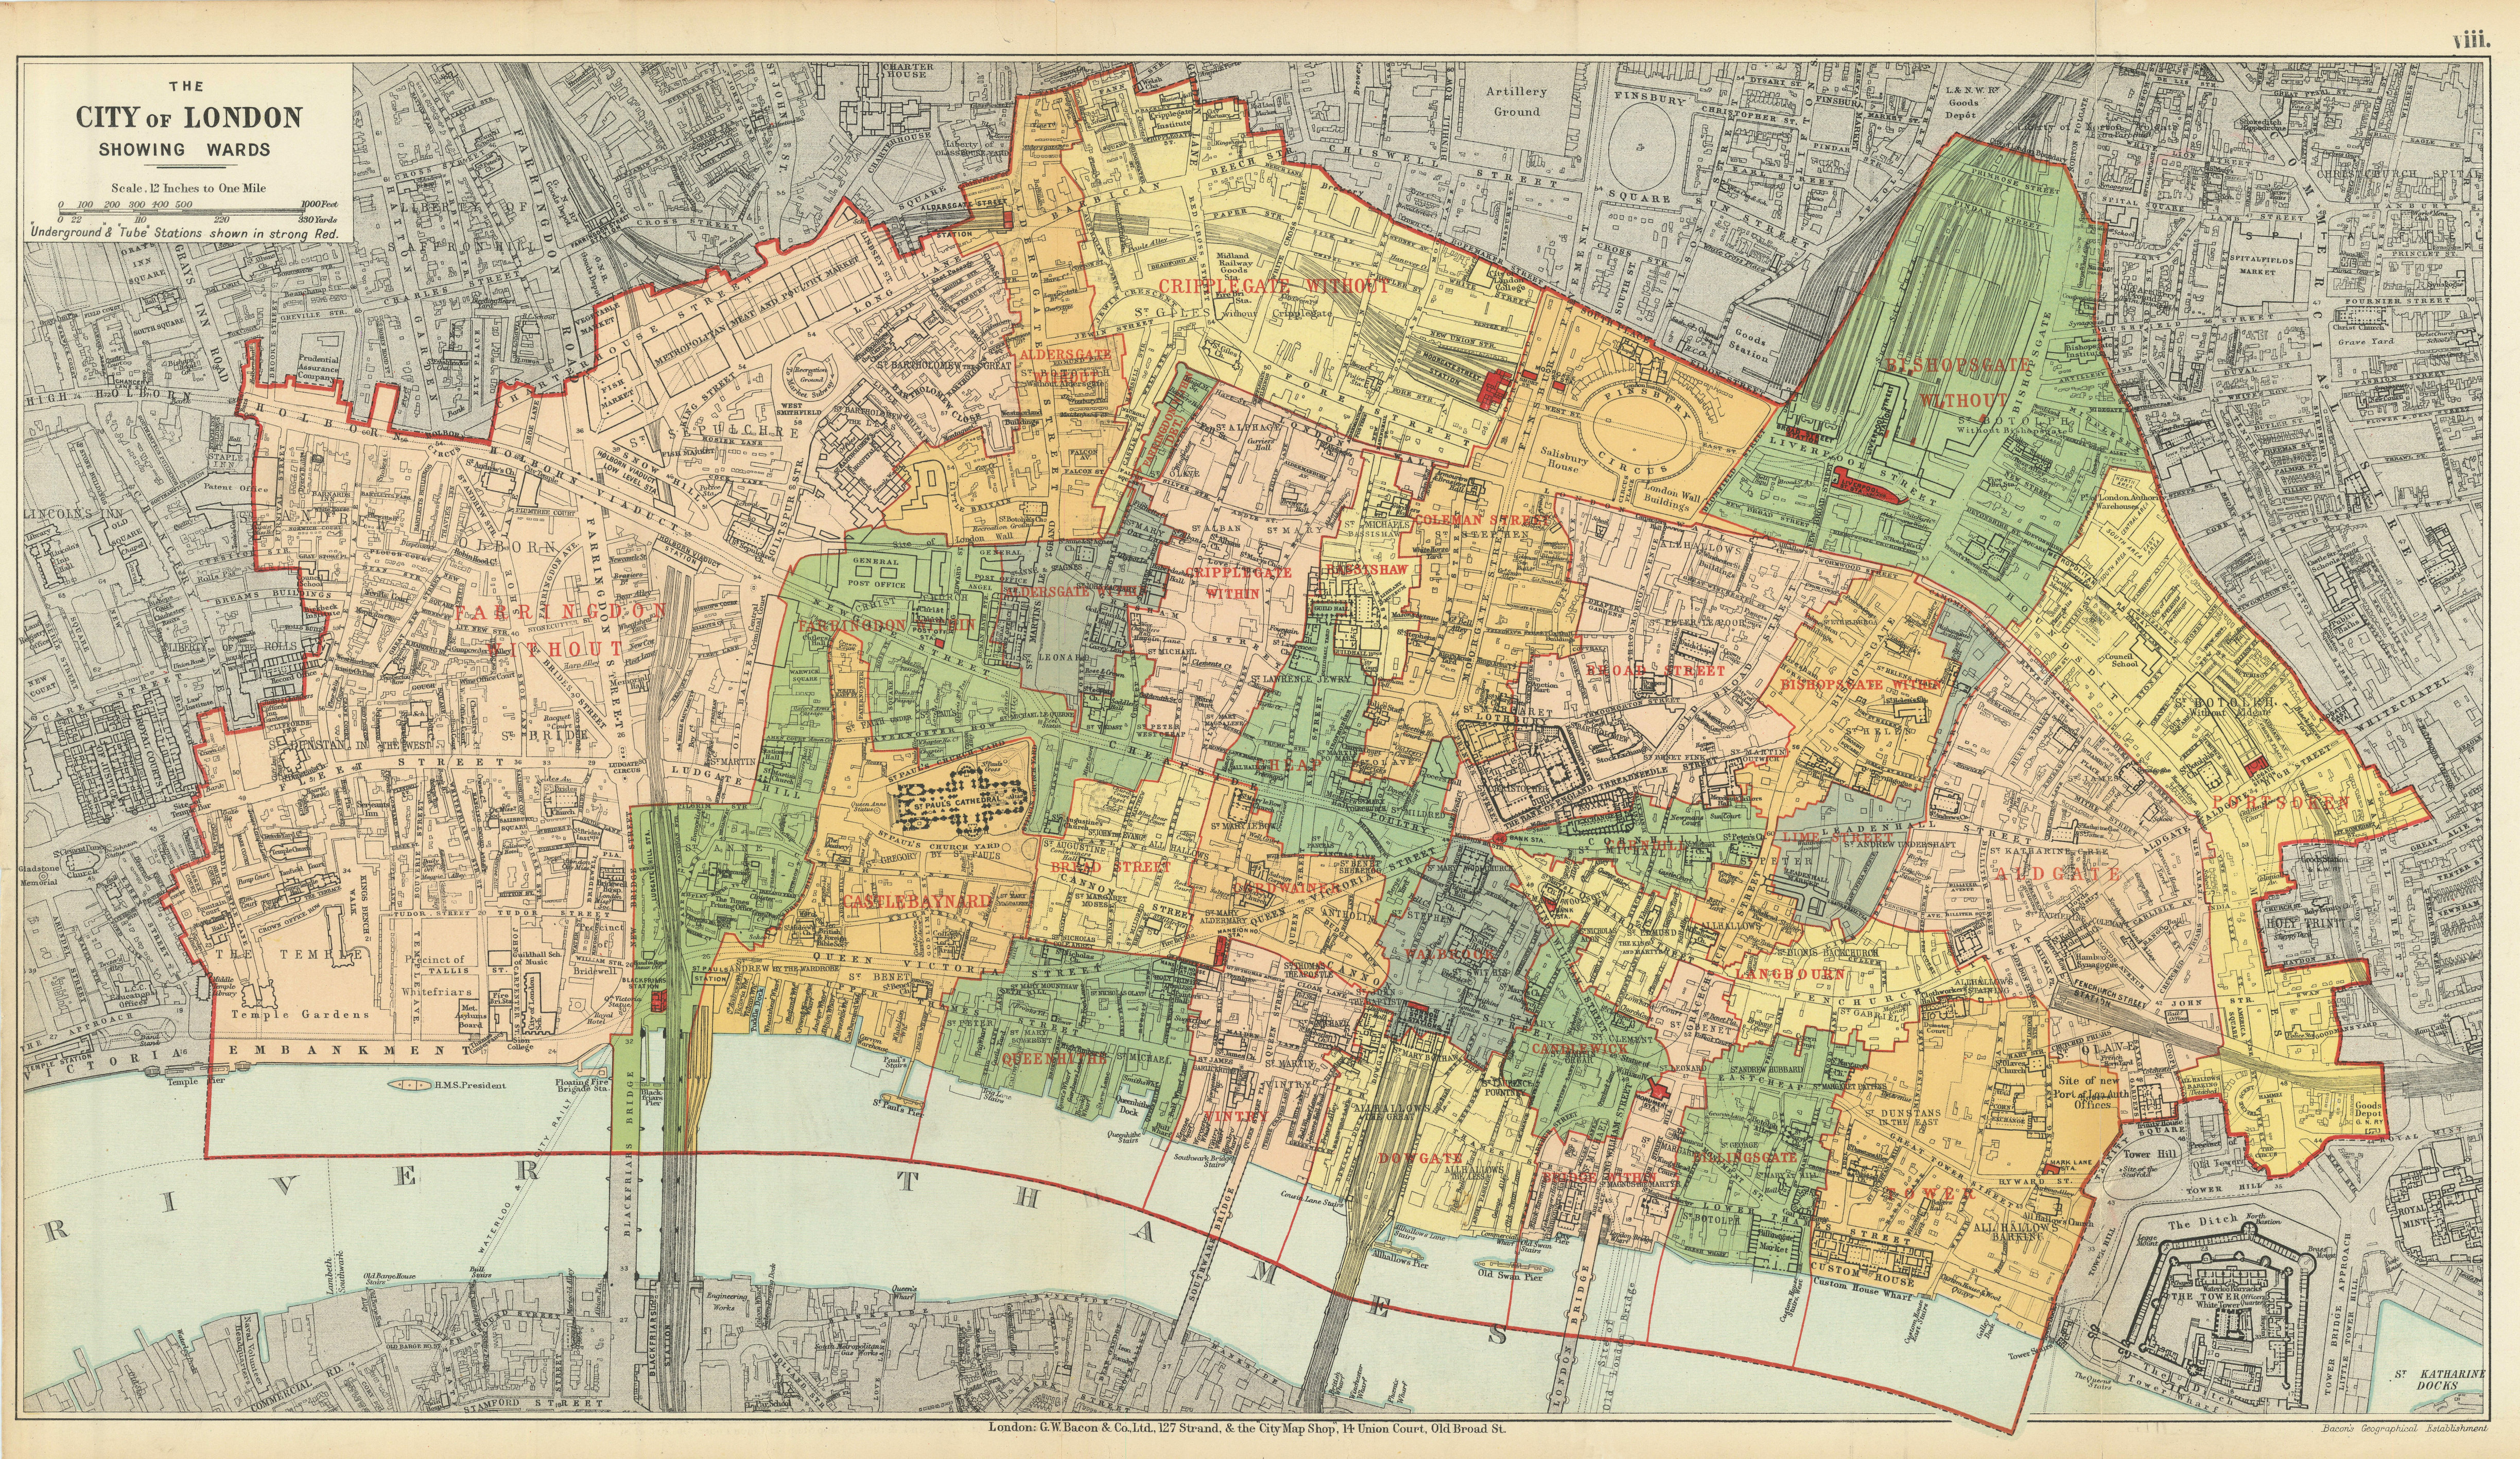 Associate Product CITY OF LONDON showing WARDS. Churches & public buildings plans. BACON 1913 map